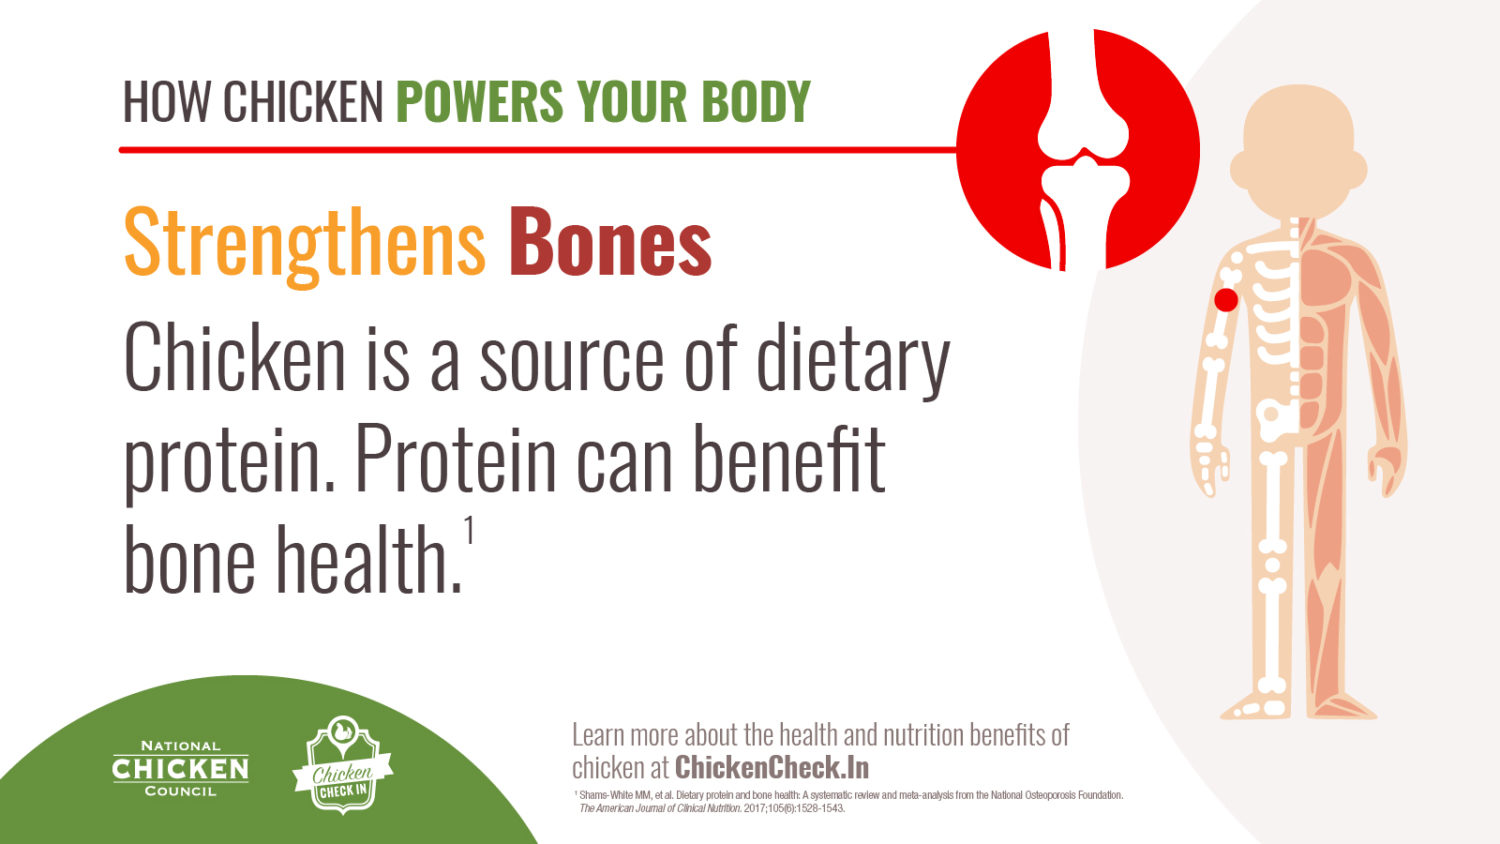 Chicken is a source of dietary protein. Protein can benefit bone health.